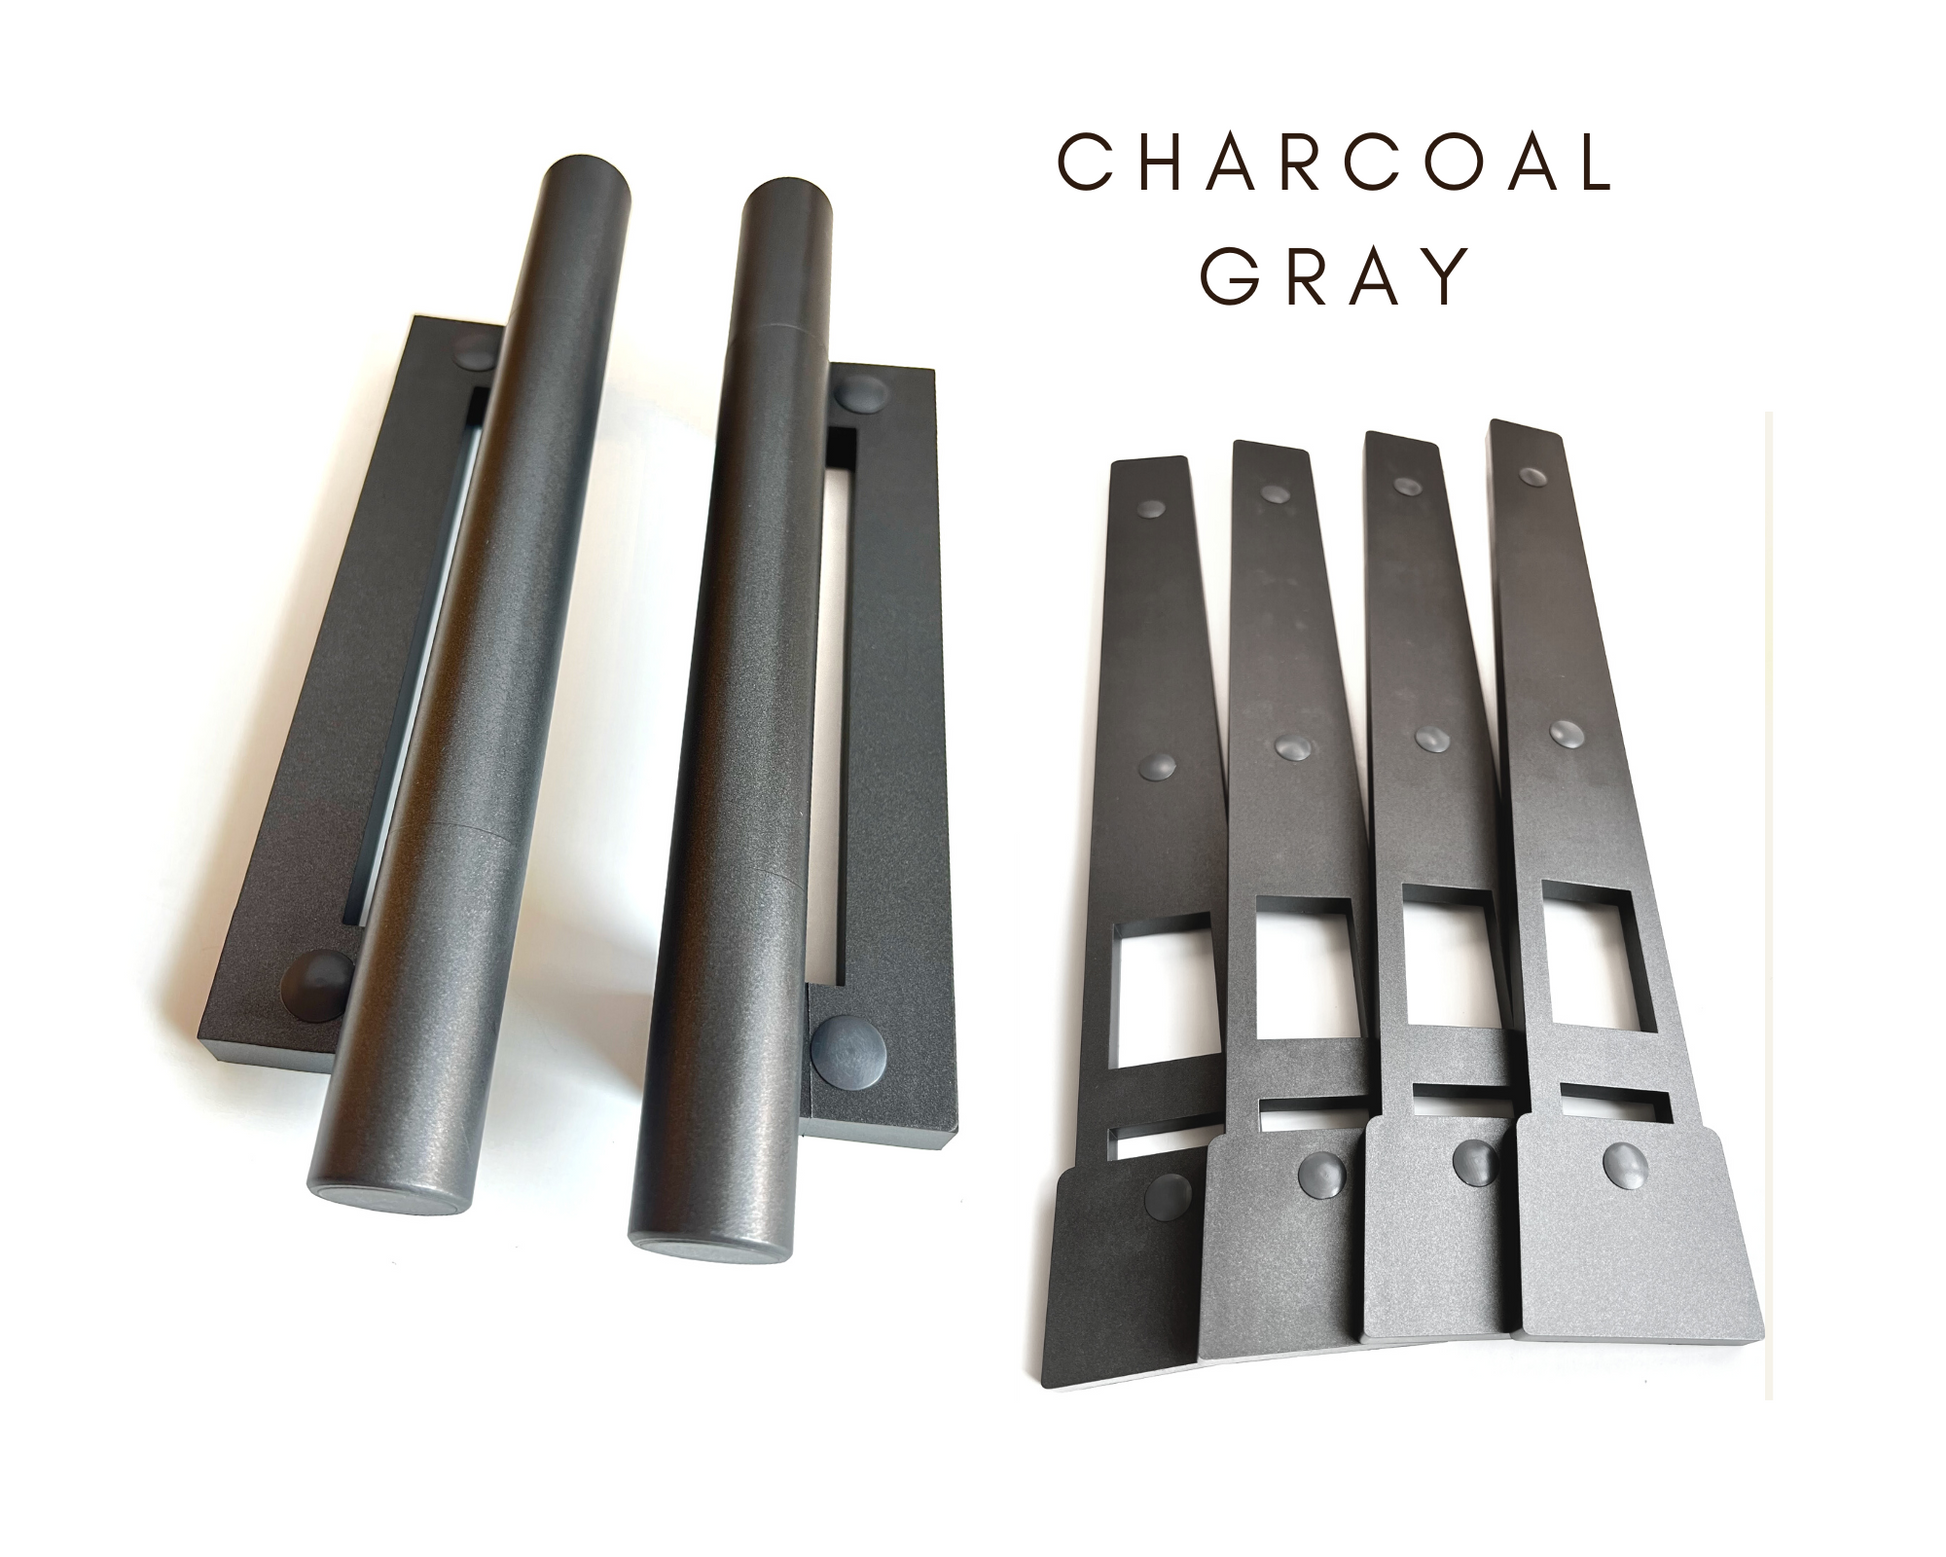 Decorative Magnetic Garage Door Hardware Handles - Charcoal Gray Glamour Accents